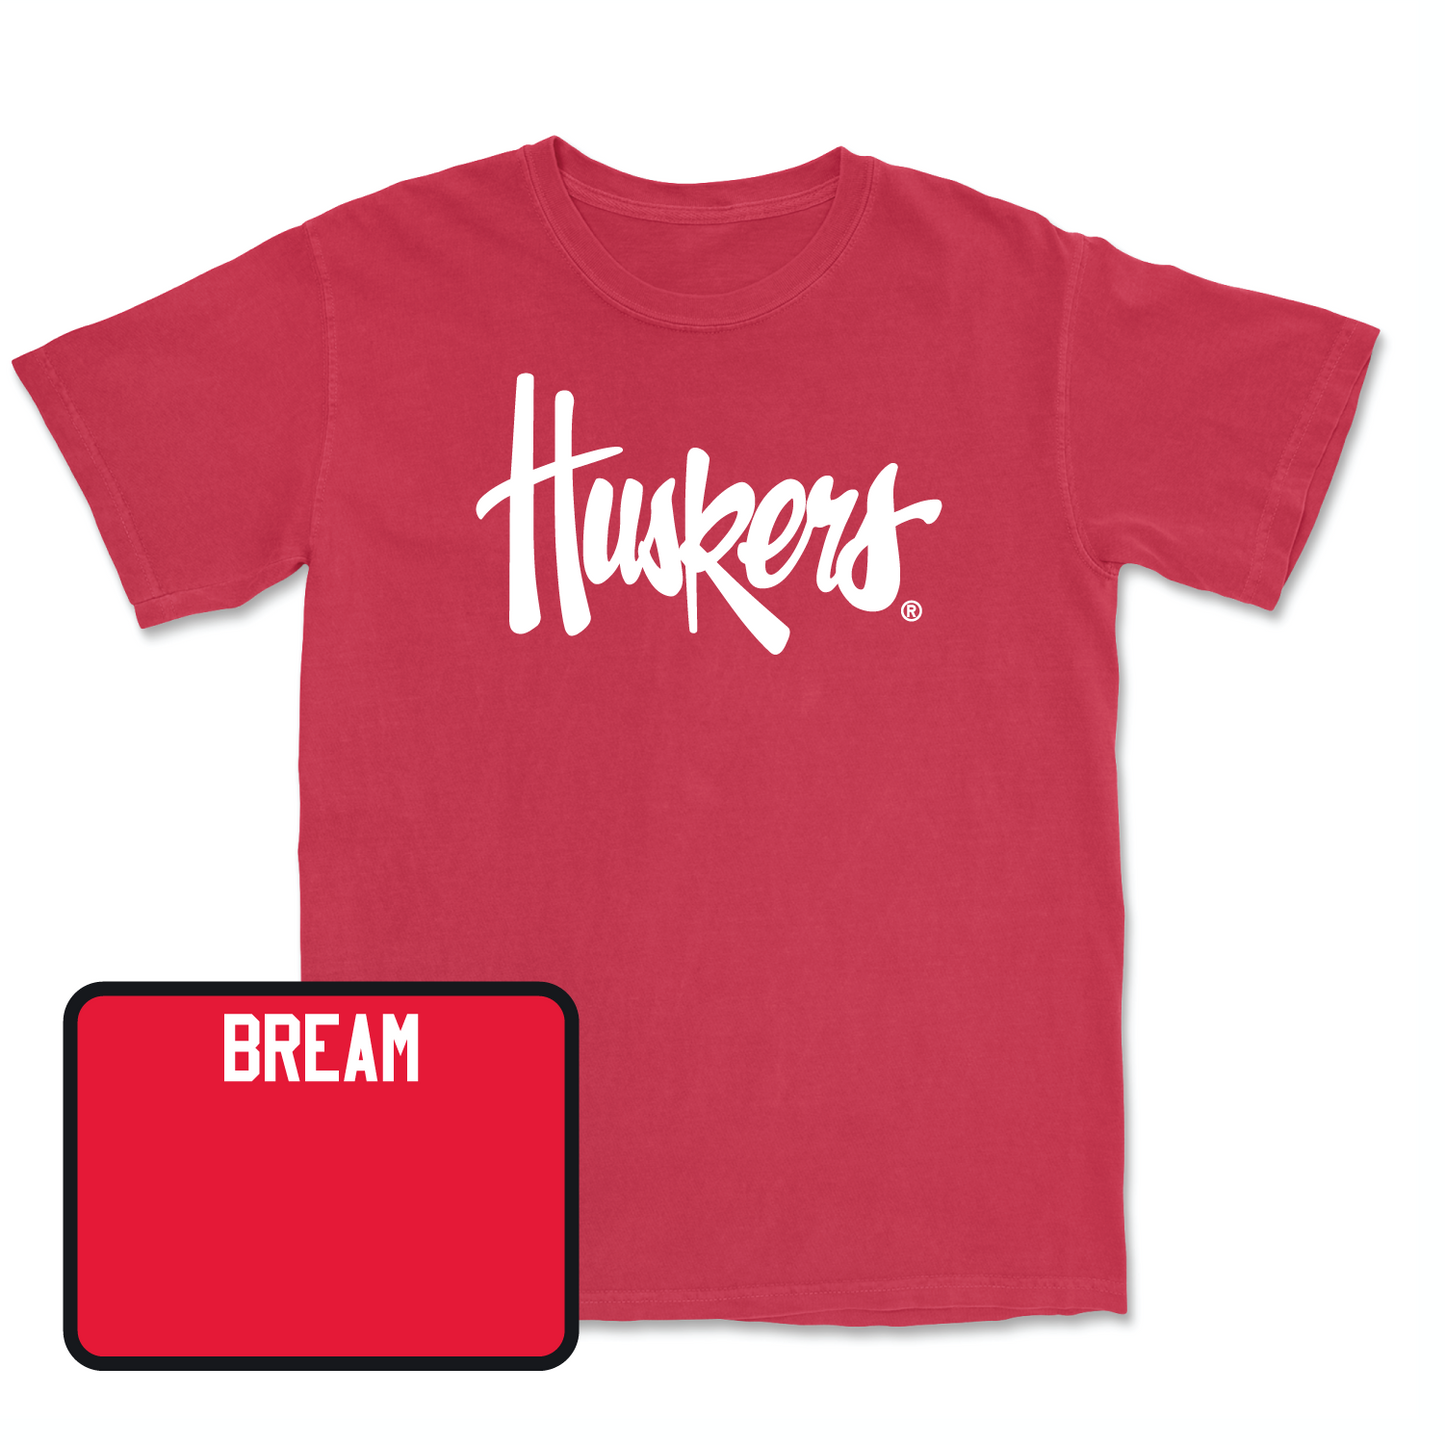 Red Women's Golf Huskers Tee Youth Large / Brooke Bream